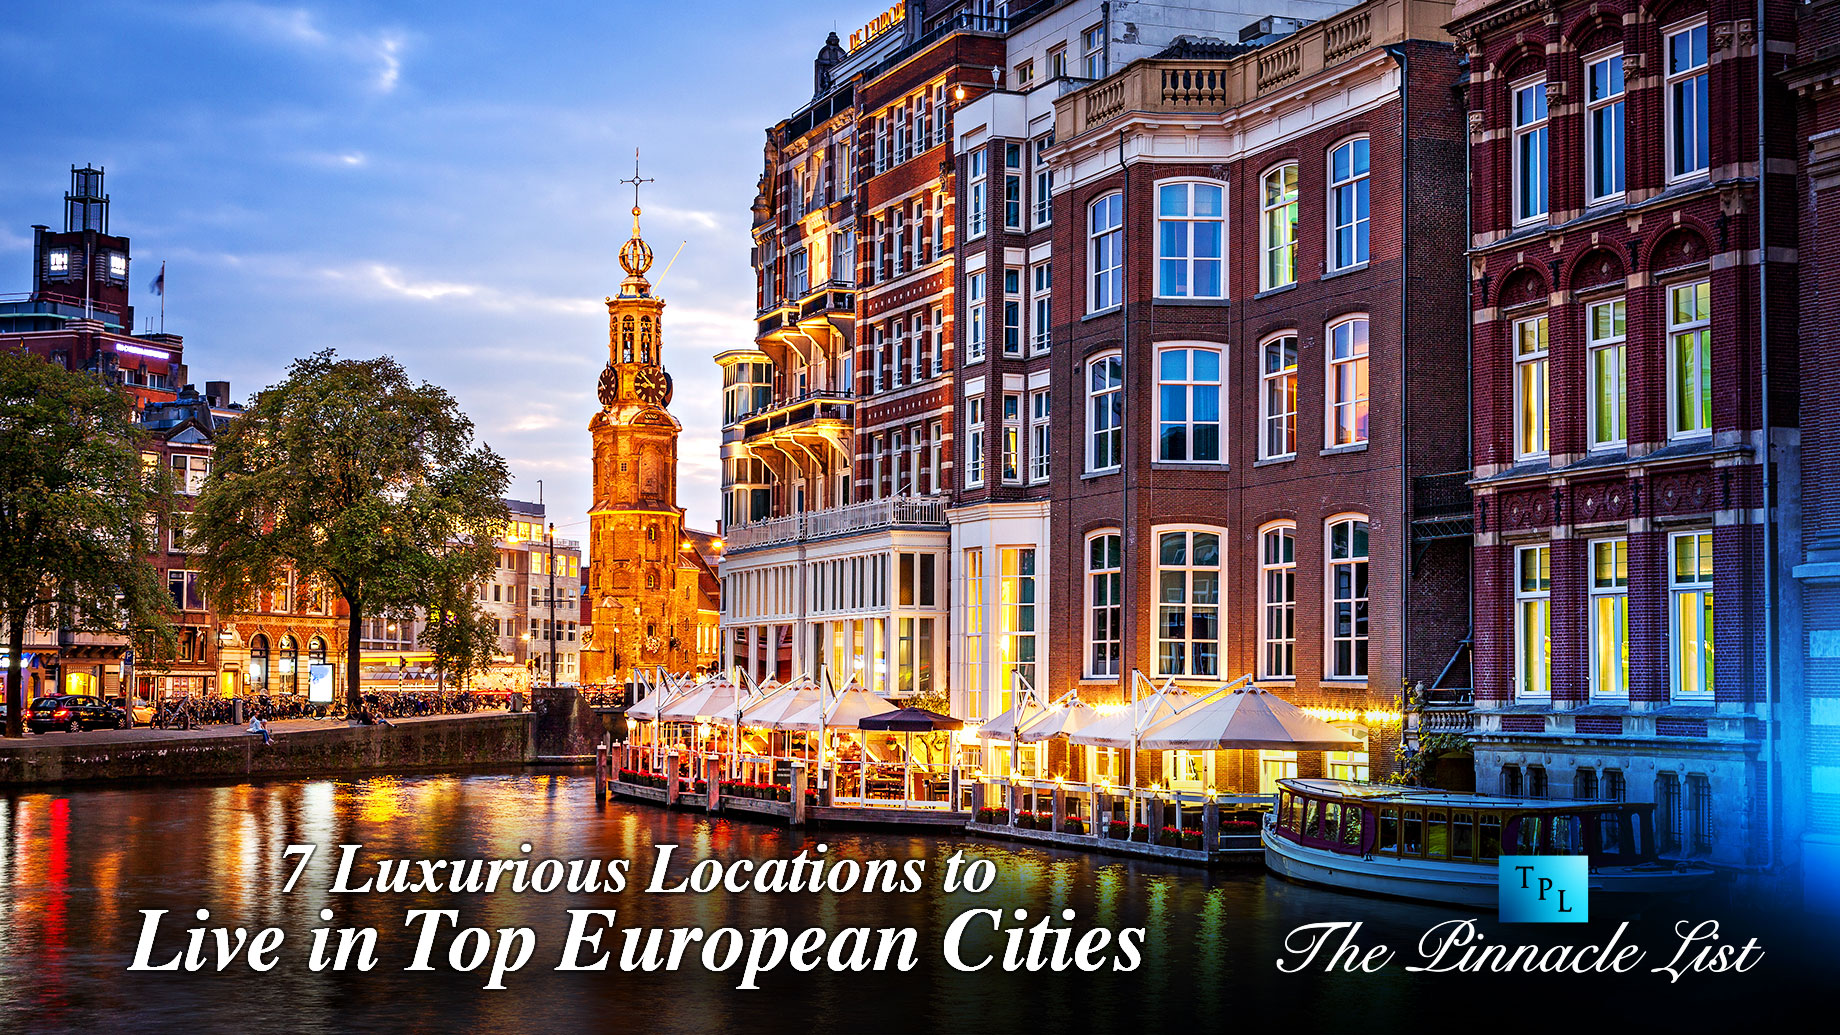 7 Luxurious Locations to Live in Top European Cities